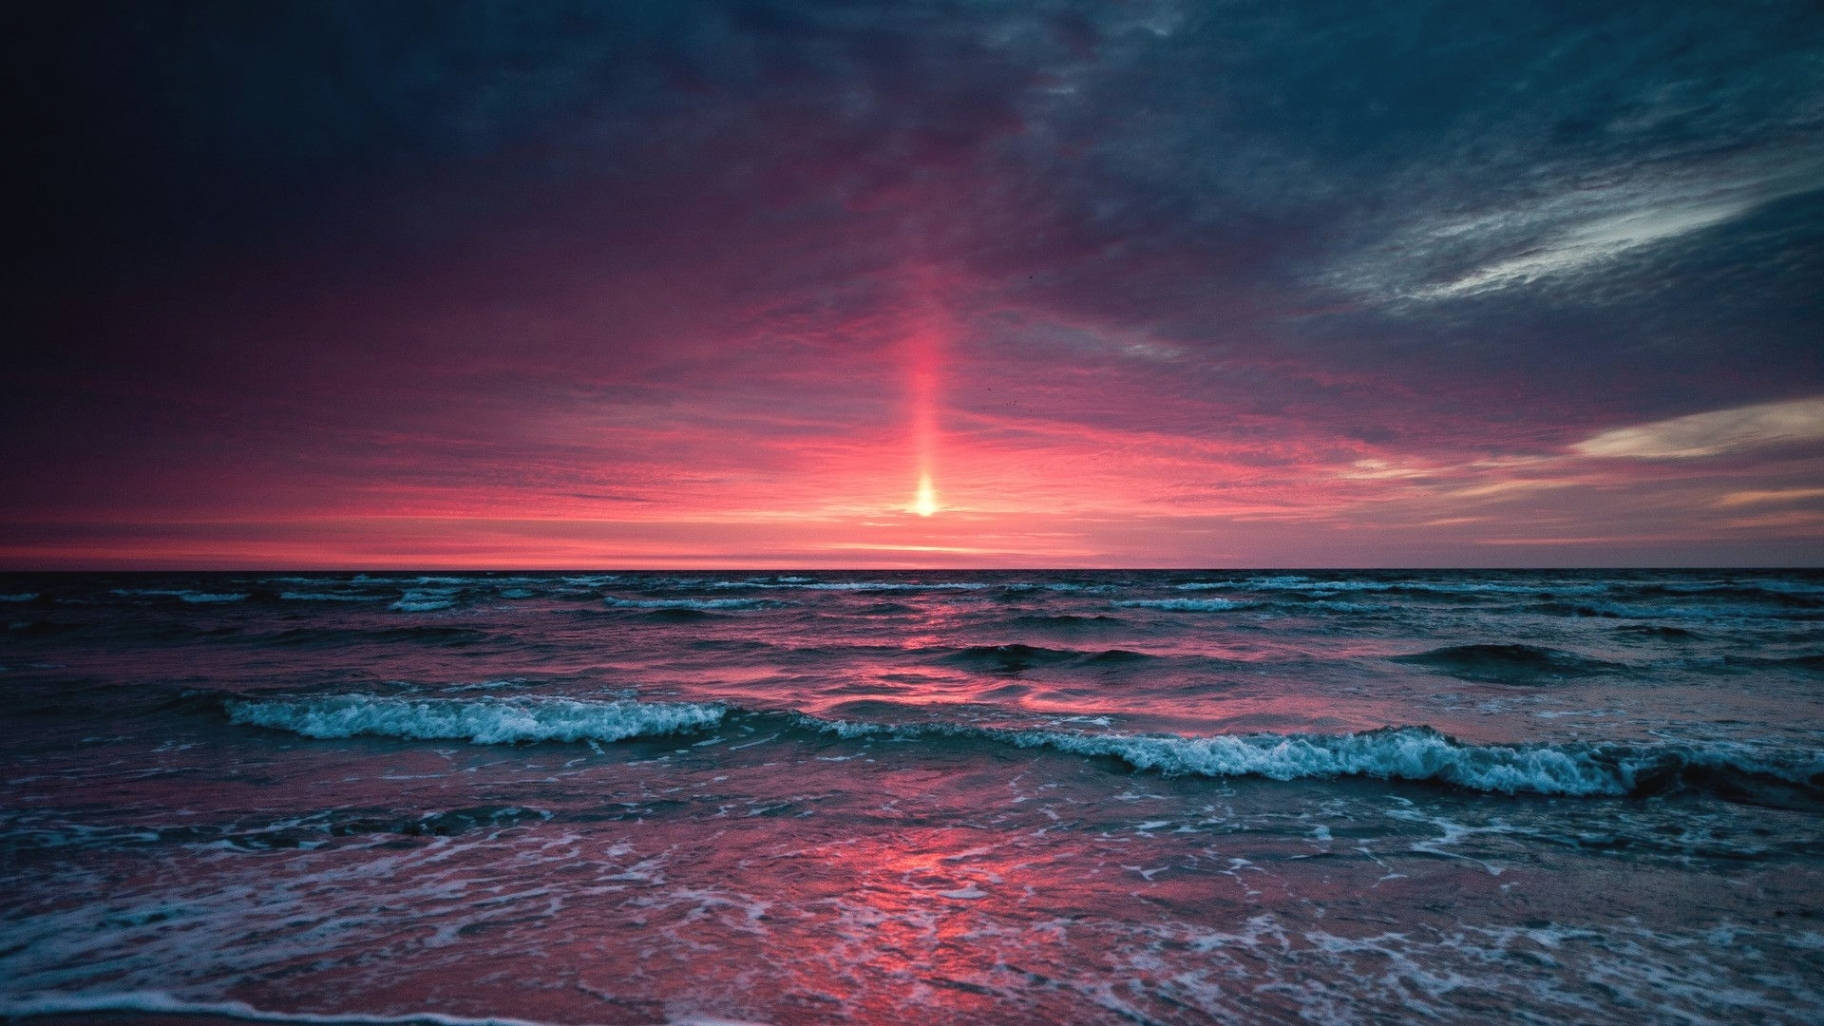 a sunset over the ocean with a red light shining Wallpaper